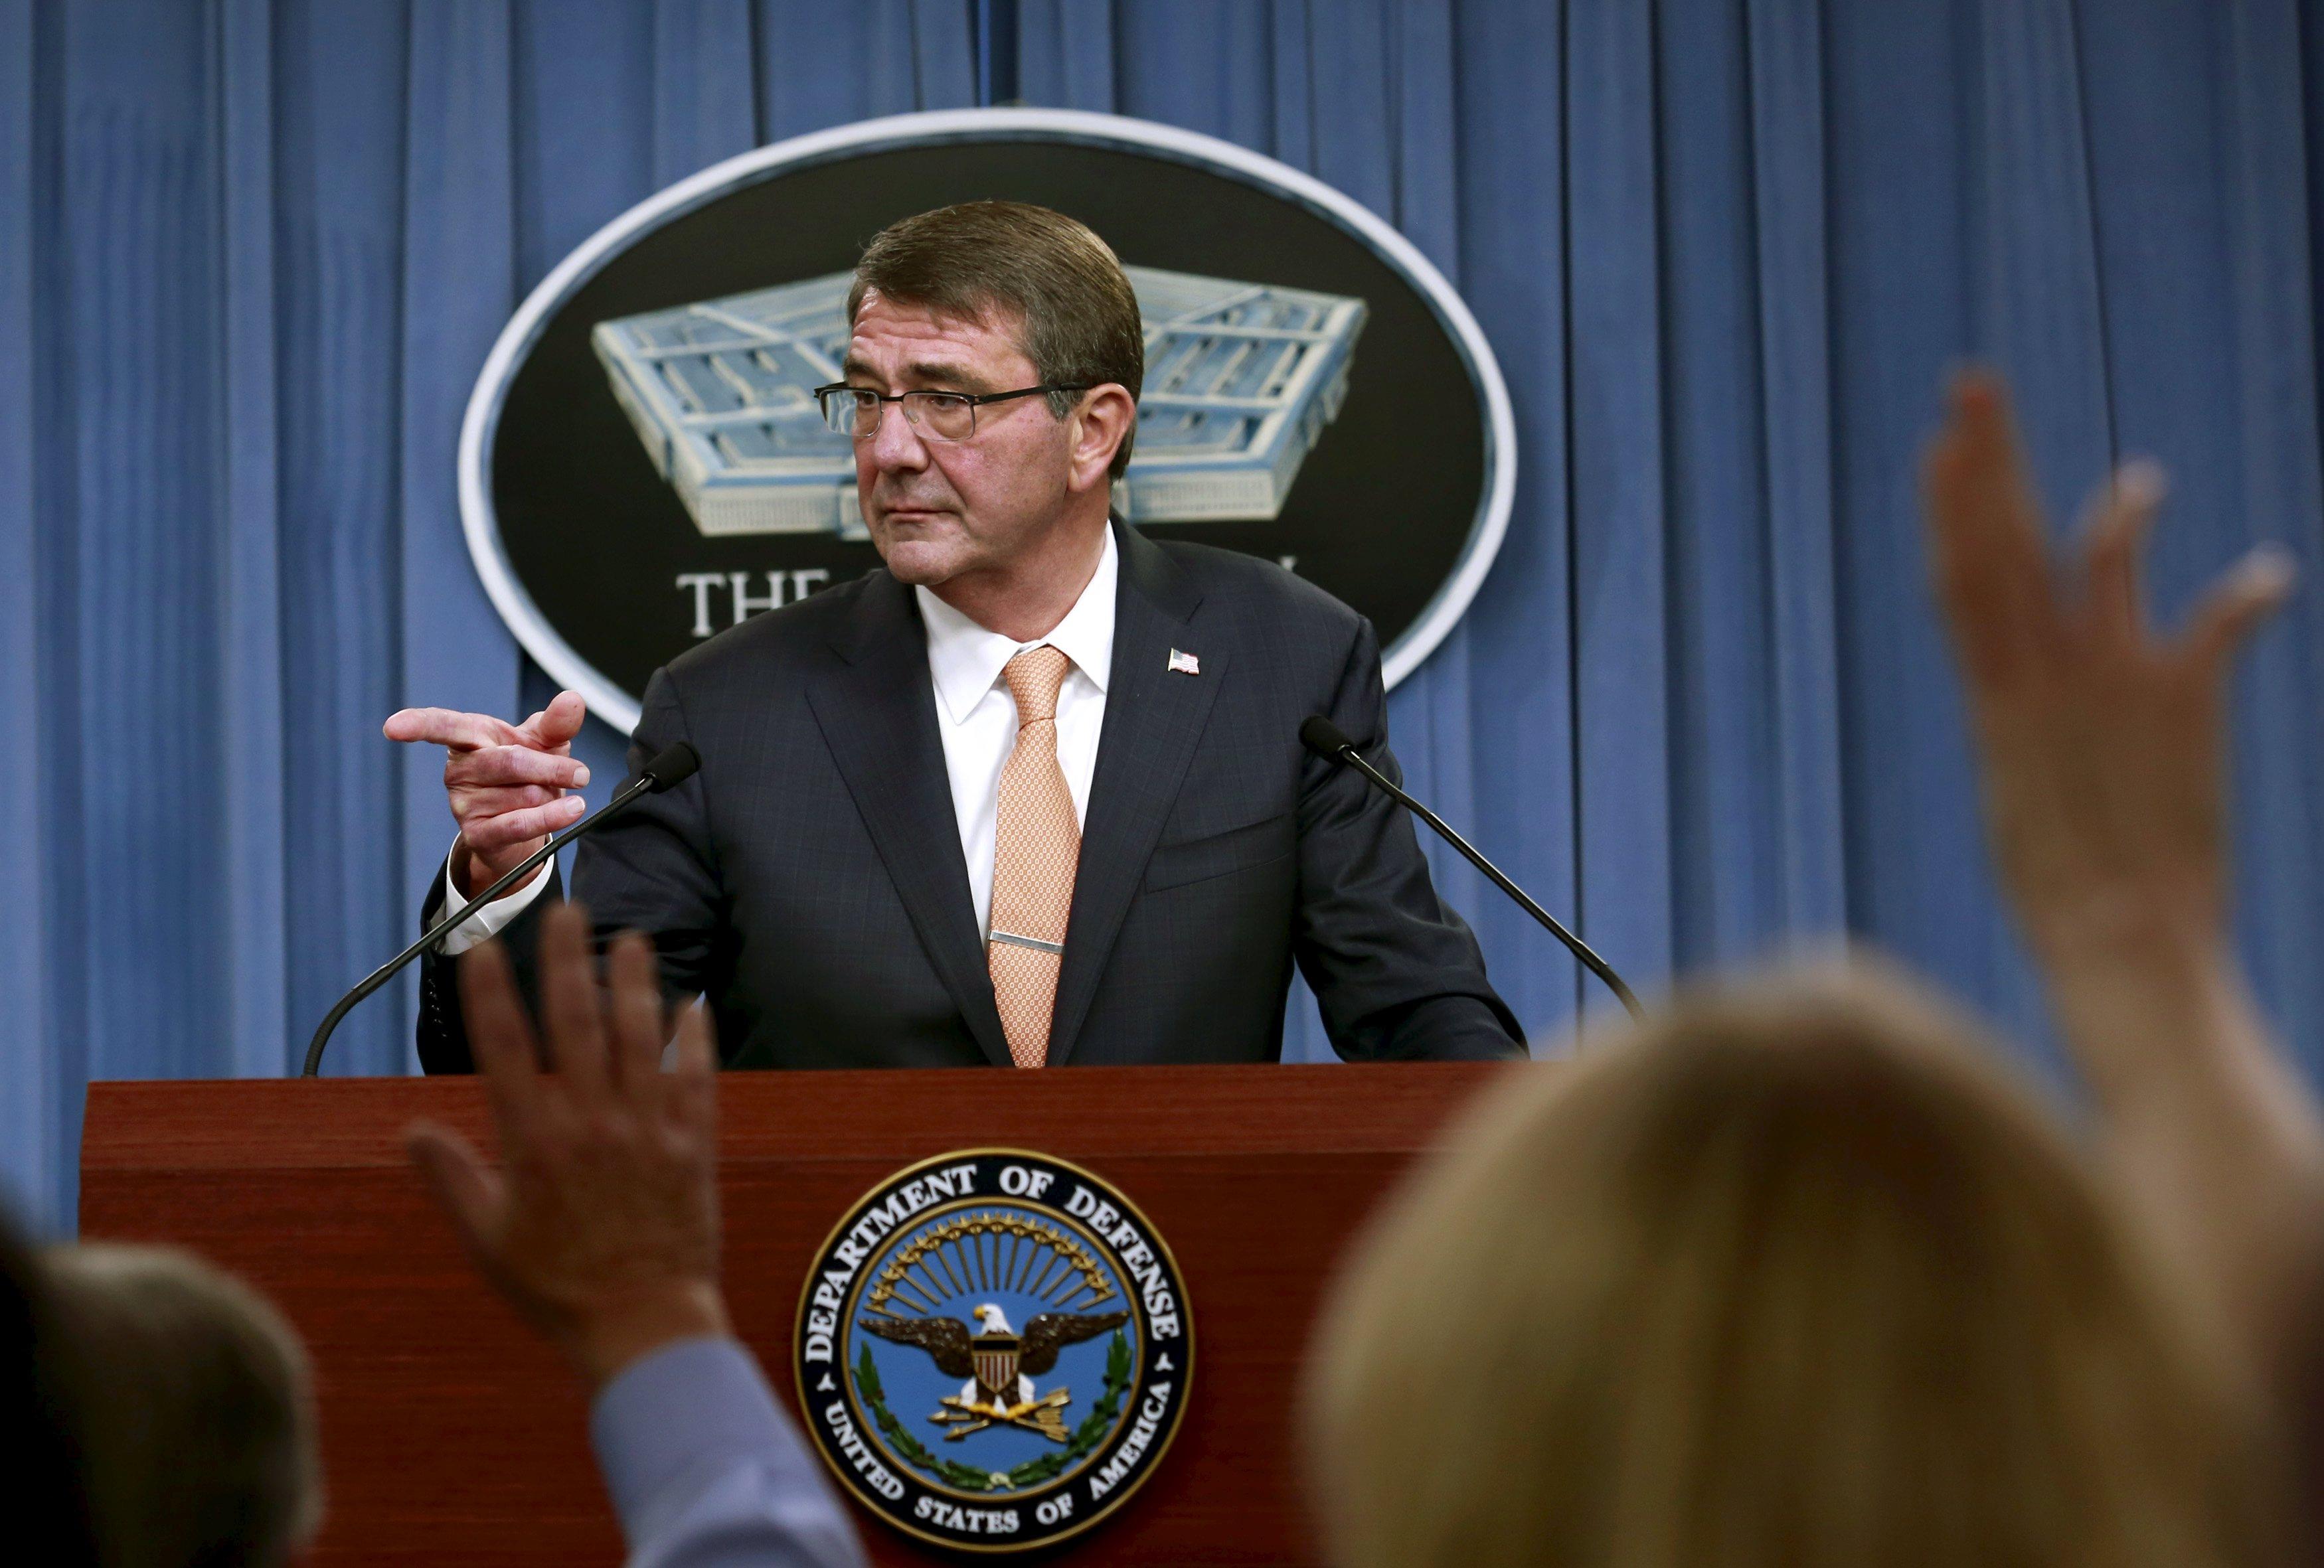 All Combat Roles Now Open to Women, Defense Secretary Says - The